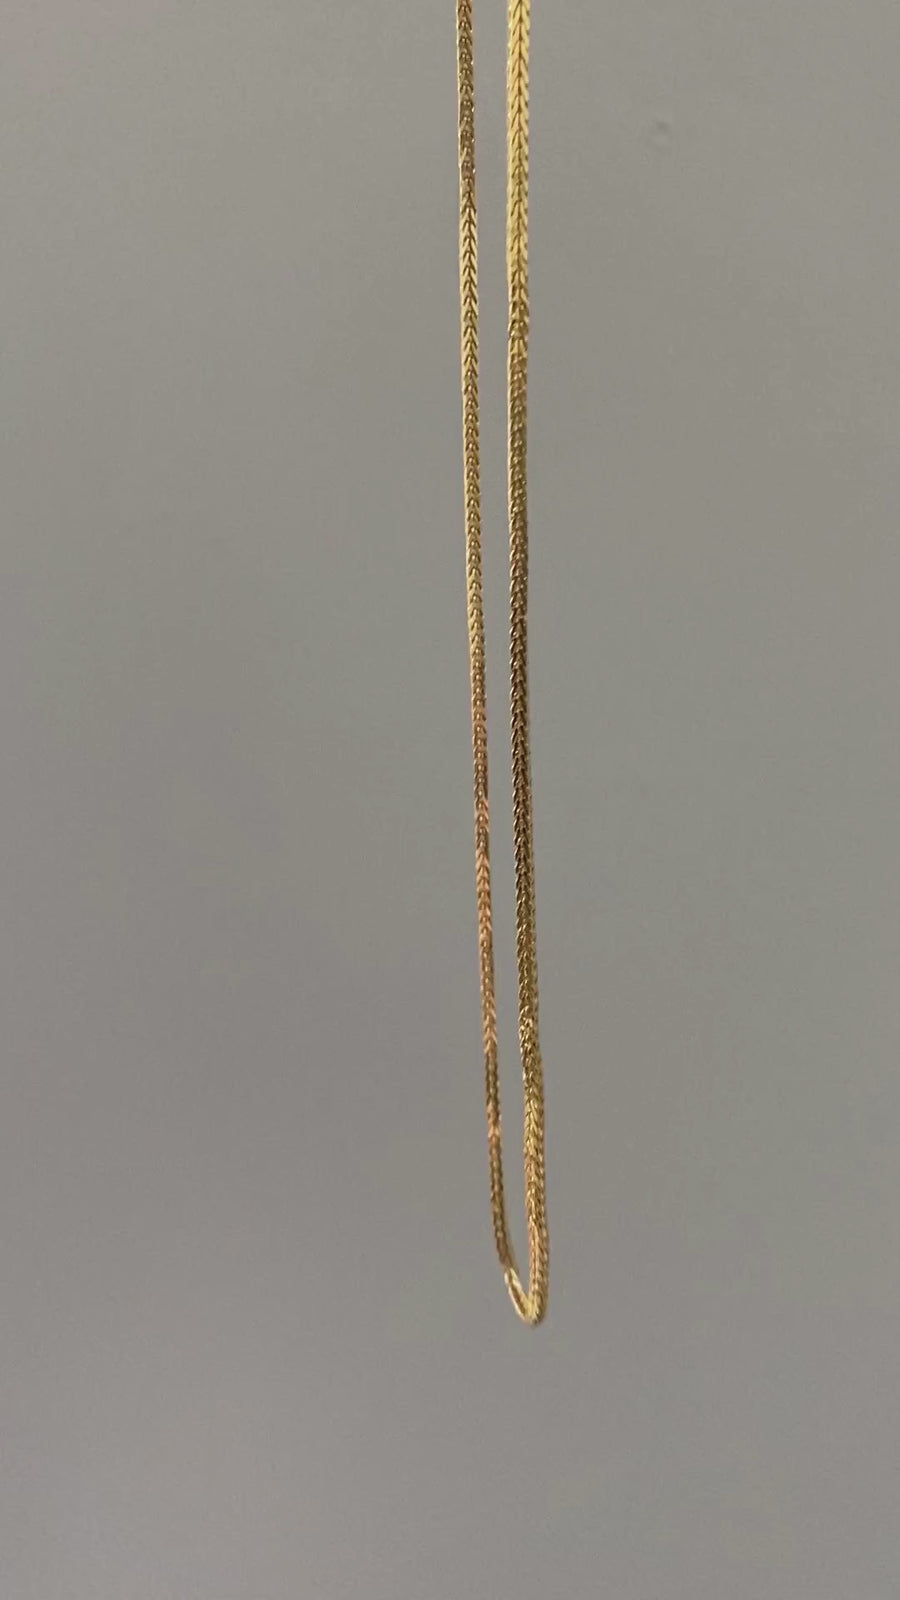 Vintage 18k italian foxtail link necklace measures 31.5 inches long